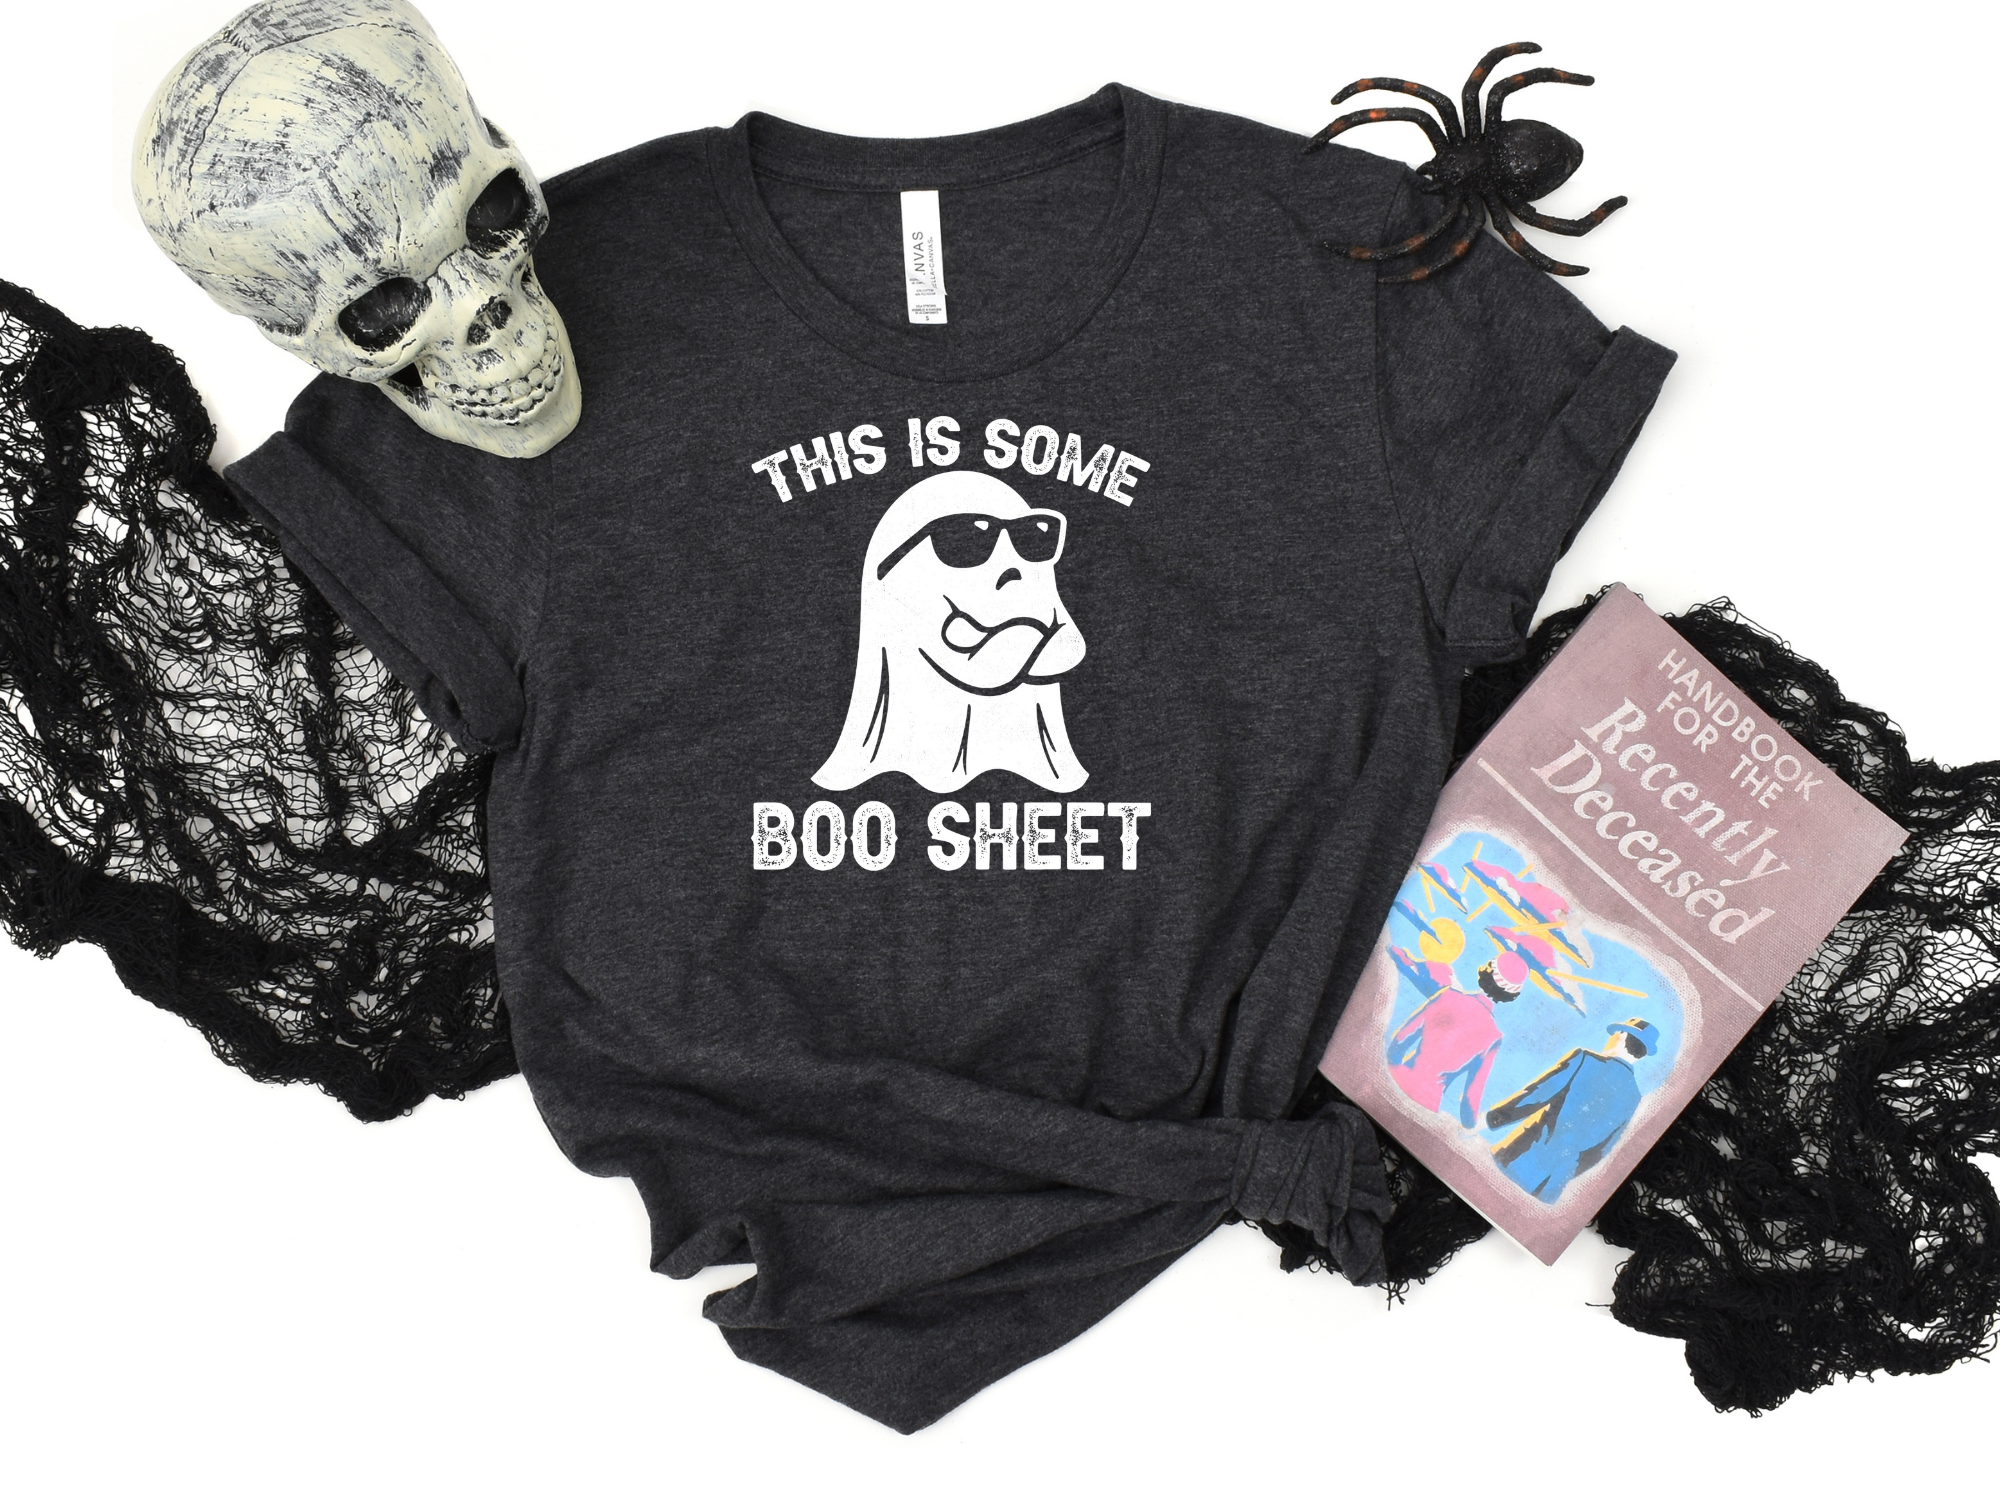 This Is Some Boo Sheet T-Shirt